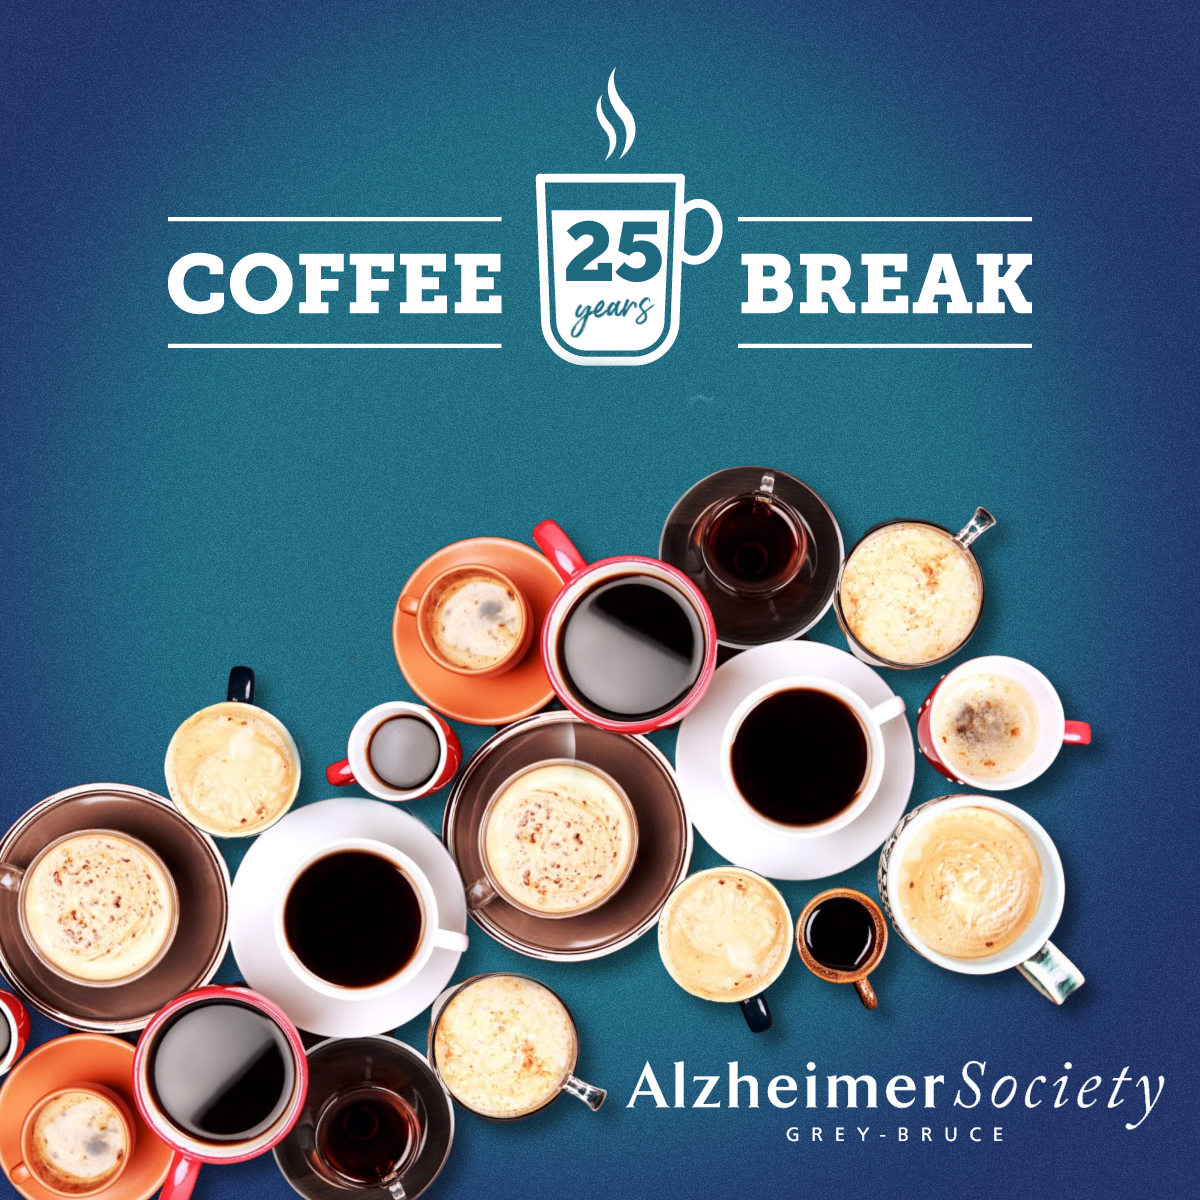 25 years of Coffee Break at the Alzheimer Society of Grey-Bruce.